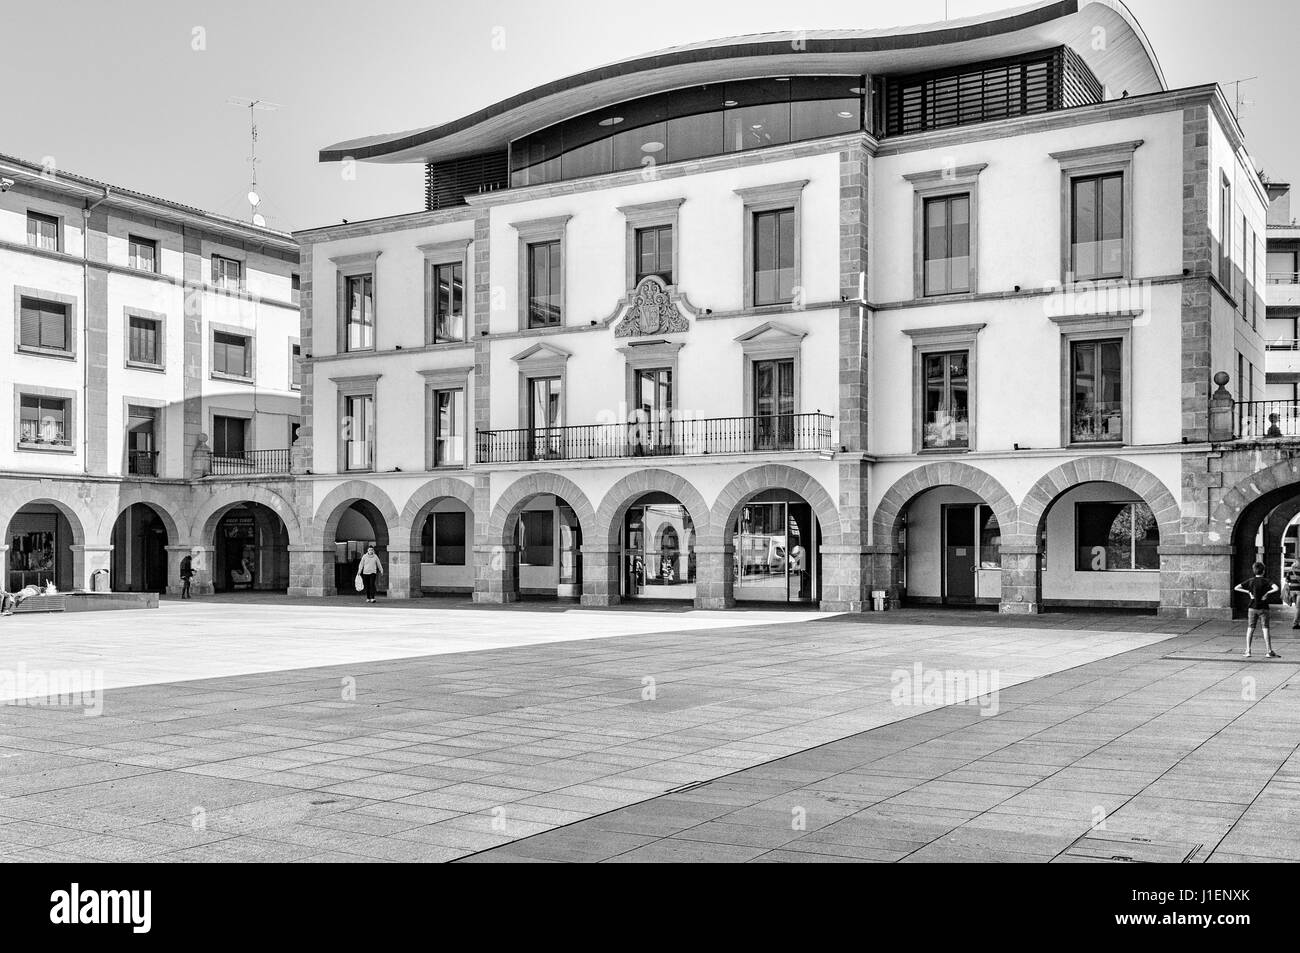 Town hall of the town of Amorebieta-Etxano.en in the province of Bizkaia, Basque Country, Spain. Stock Photo